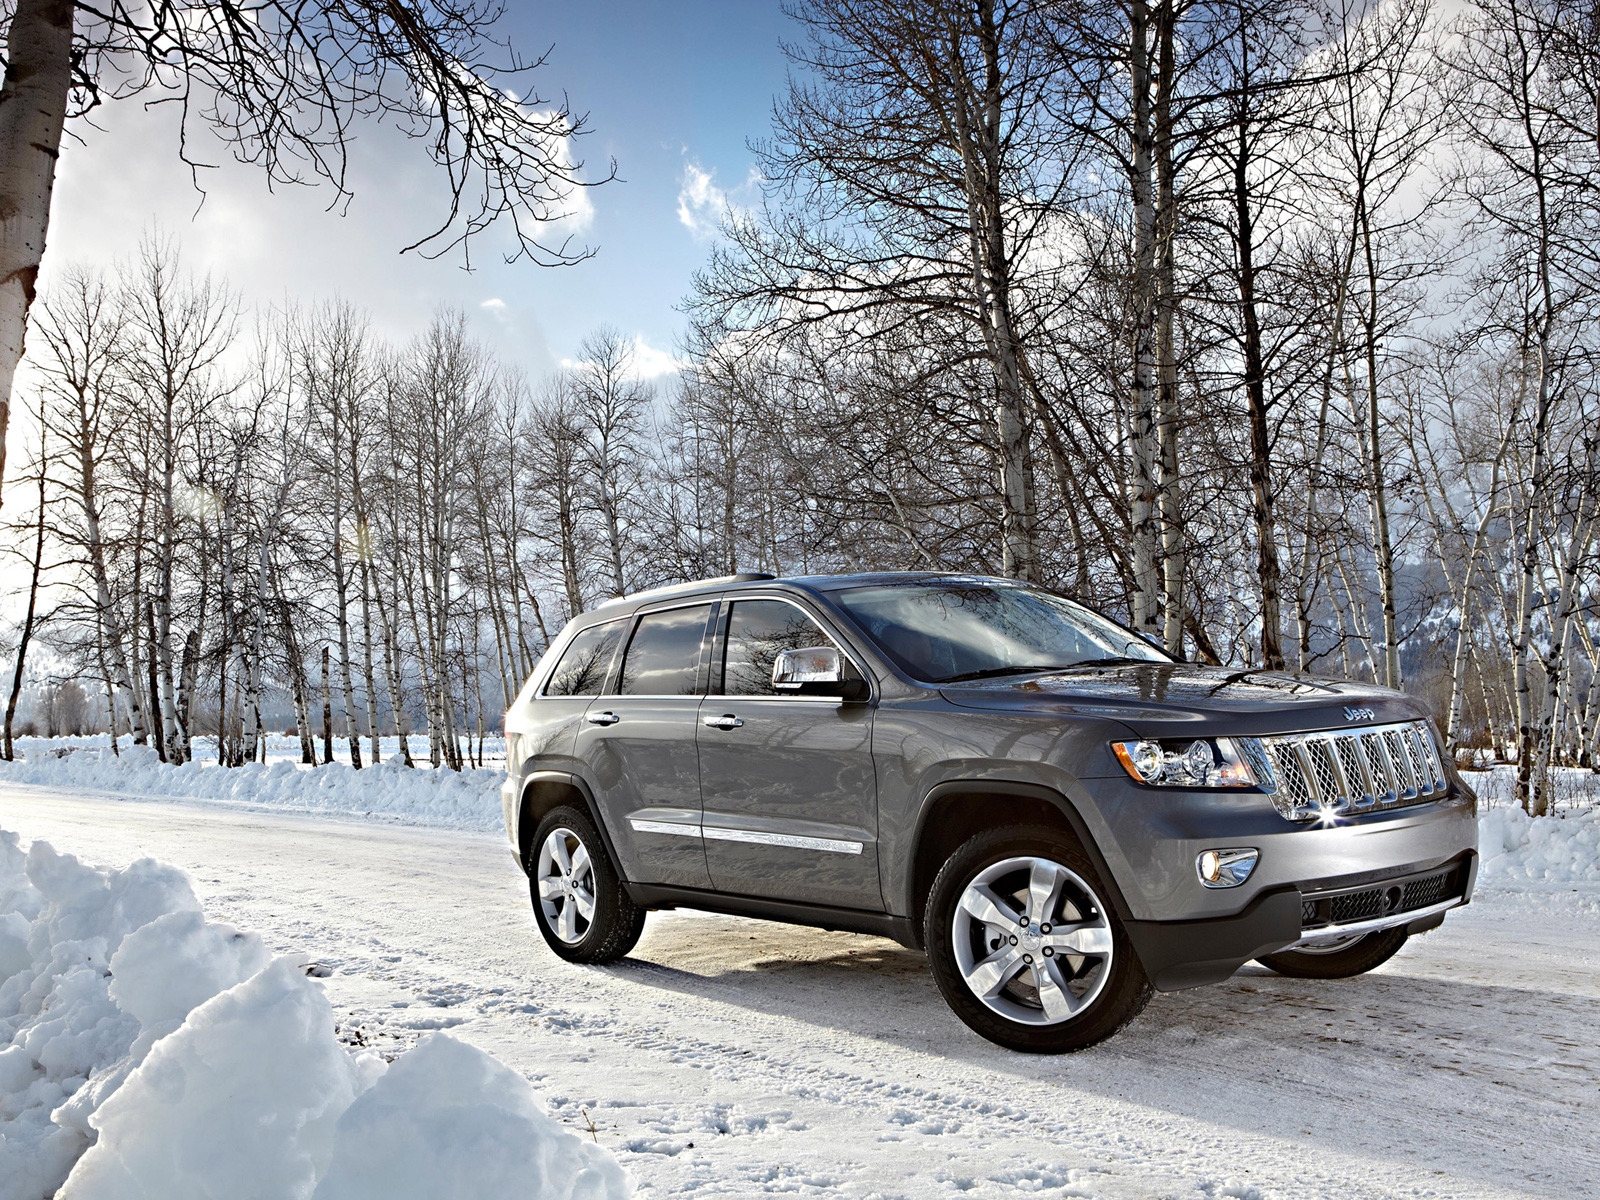 2012 Jeep Grand Cherokee for 1600 x 1200 resolution